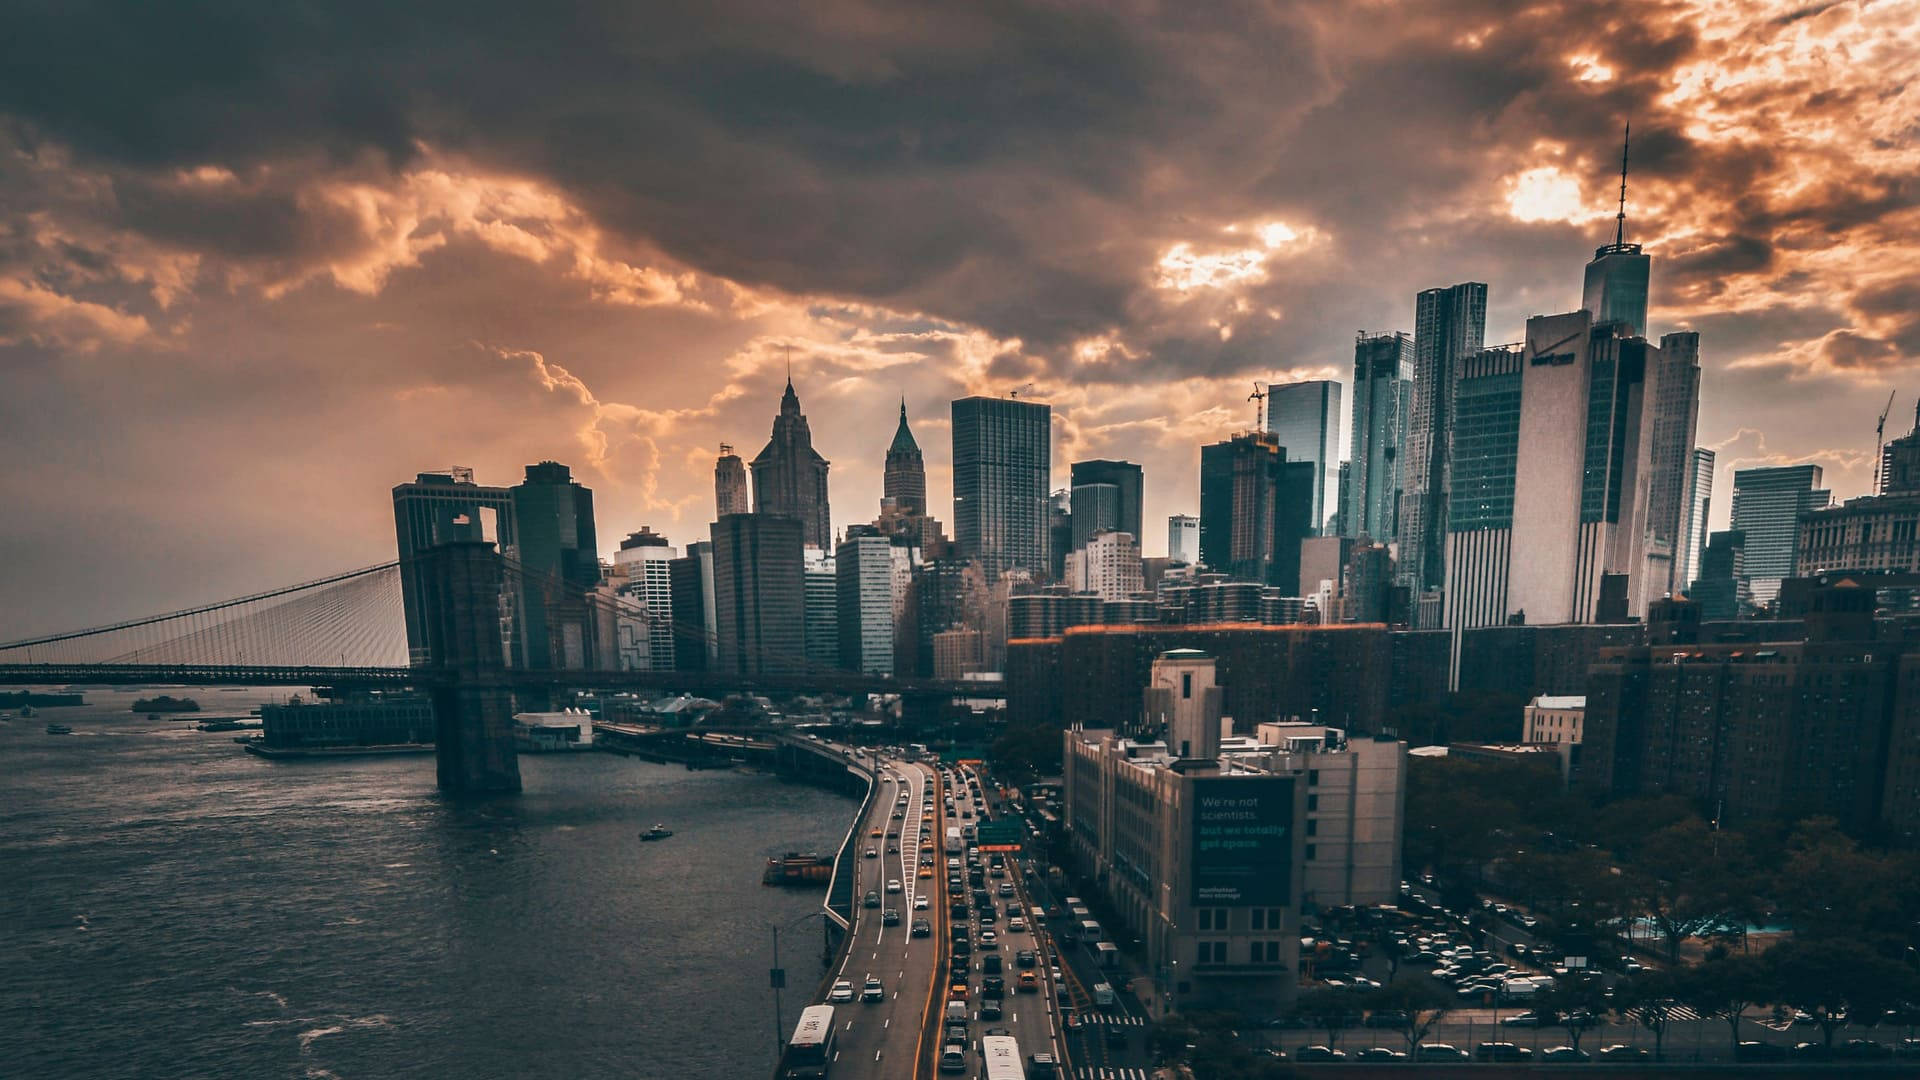 A photo of the city of New York with a cloudy sky - New York